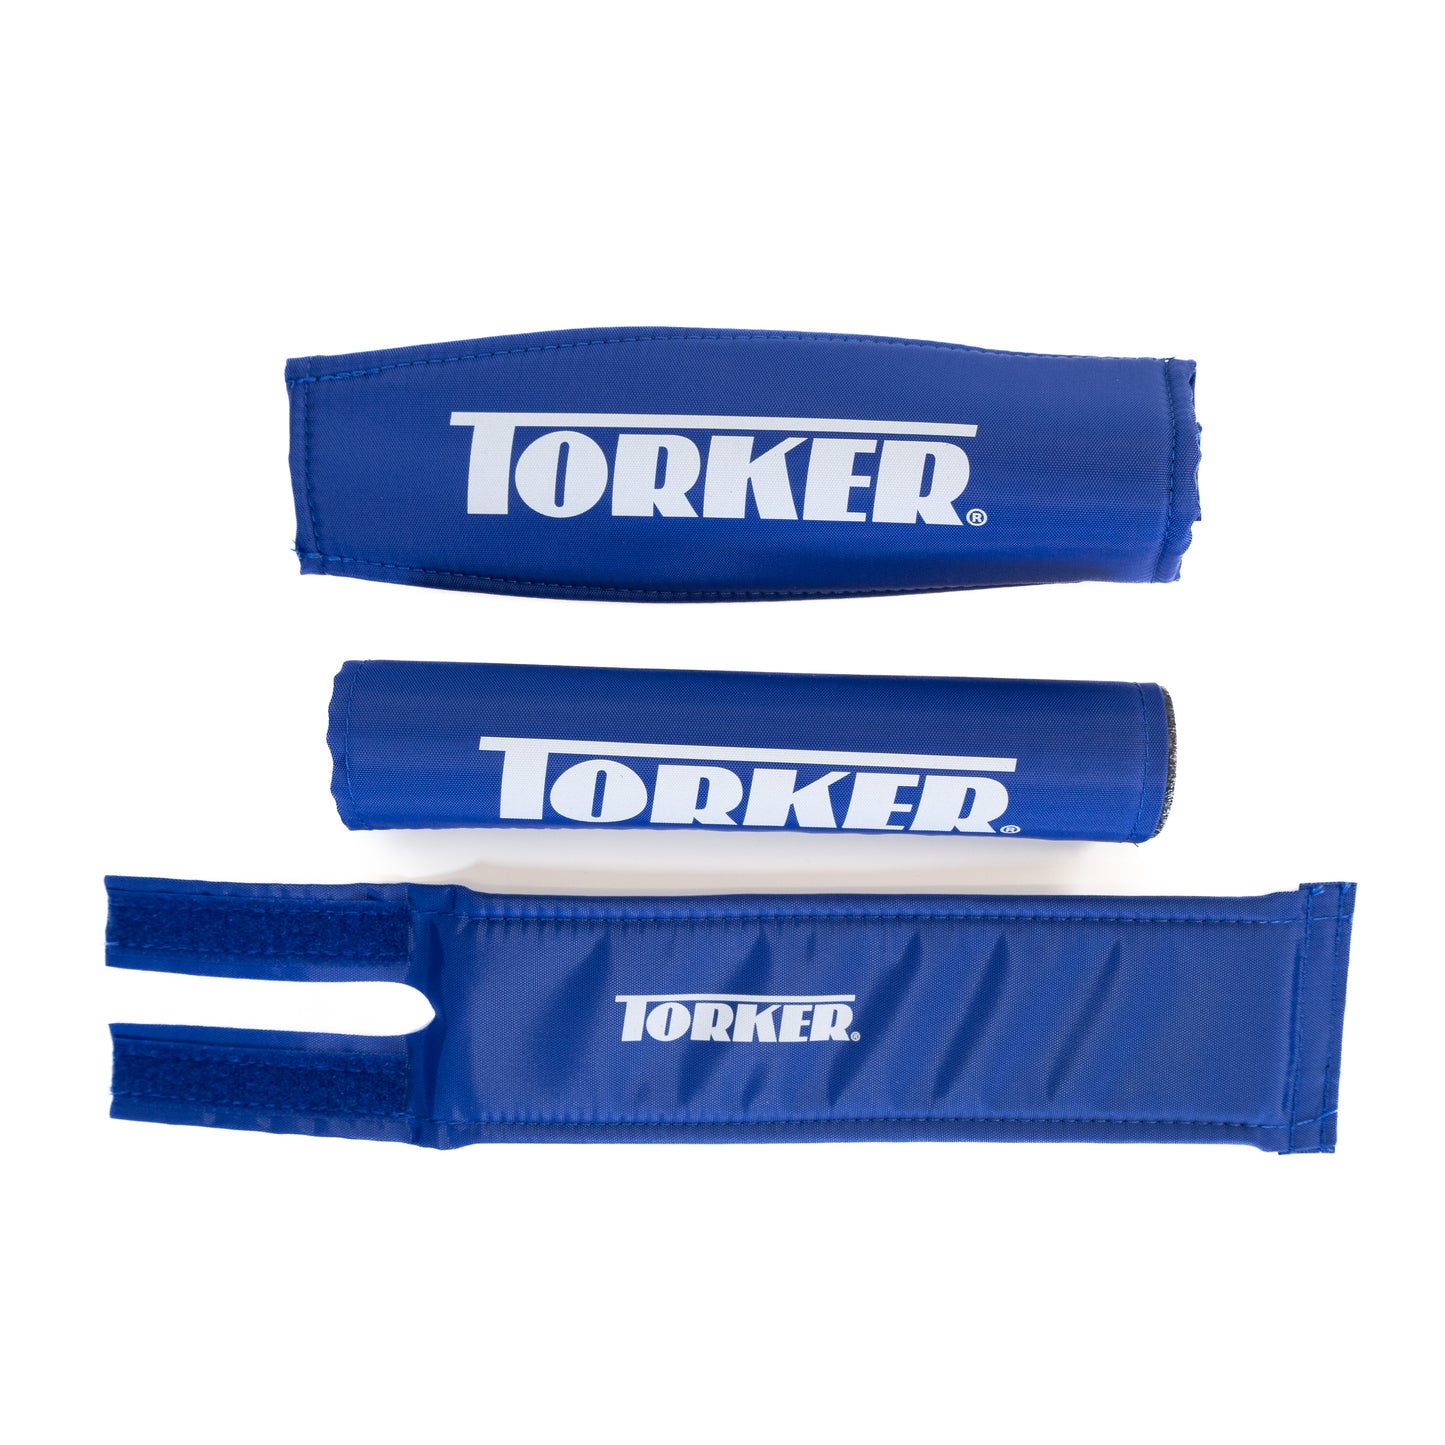 Torker Velcro Padsets - By Flite